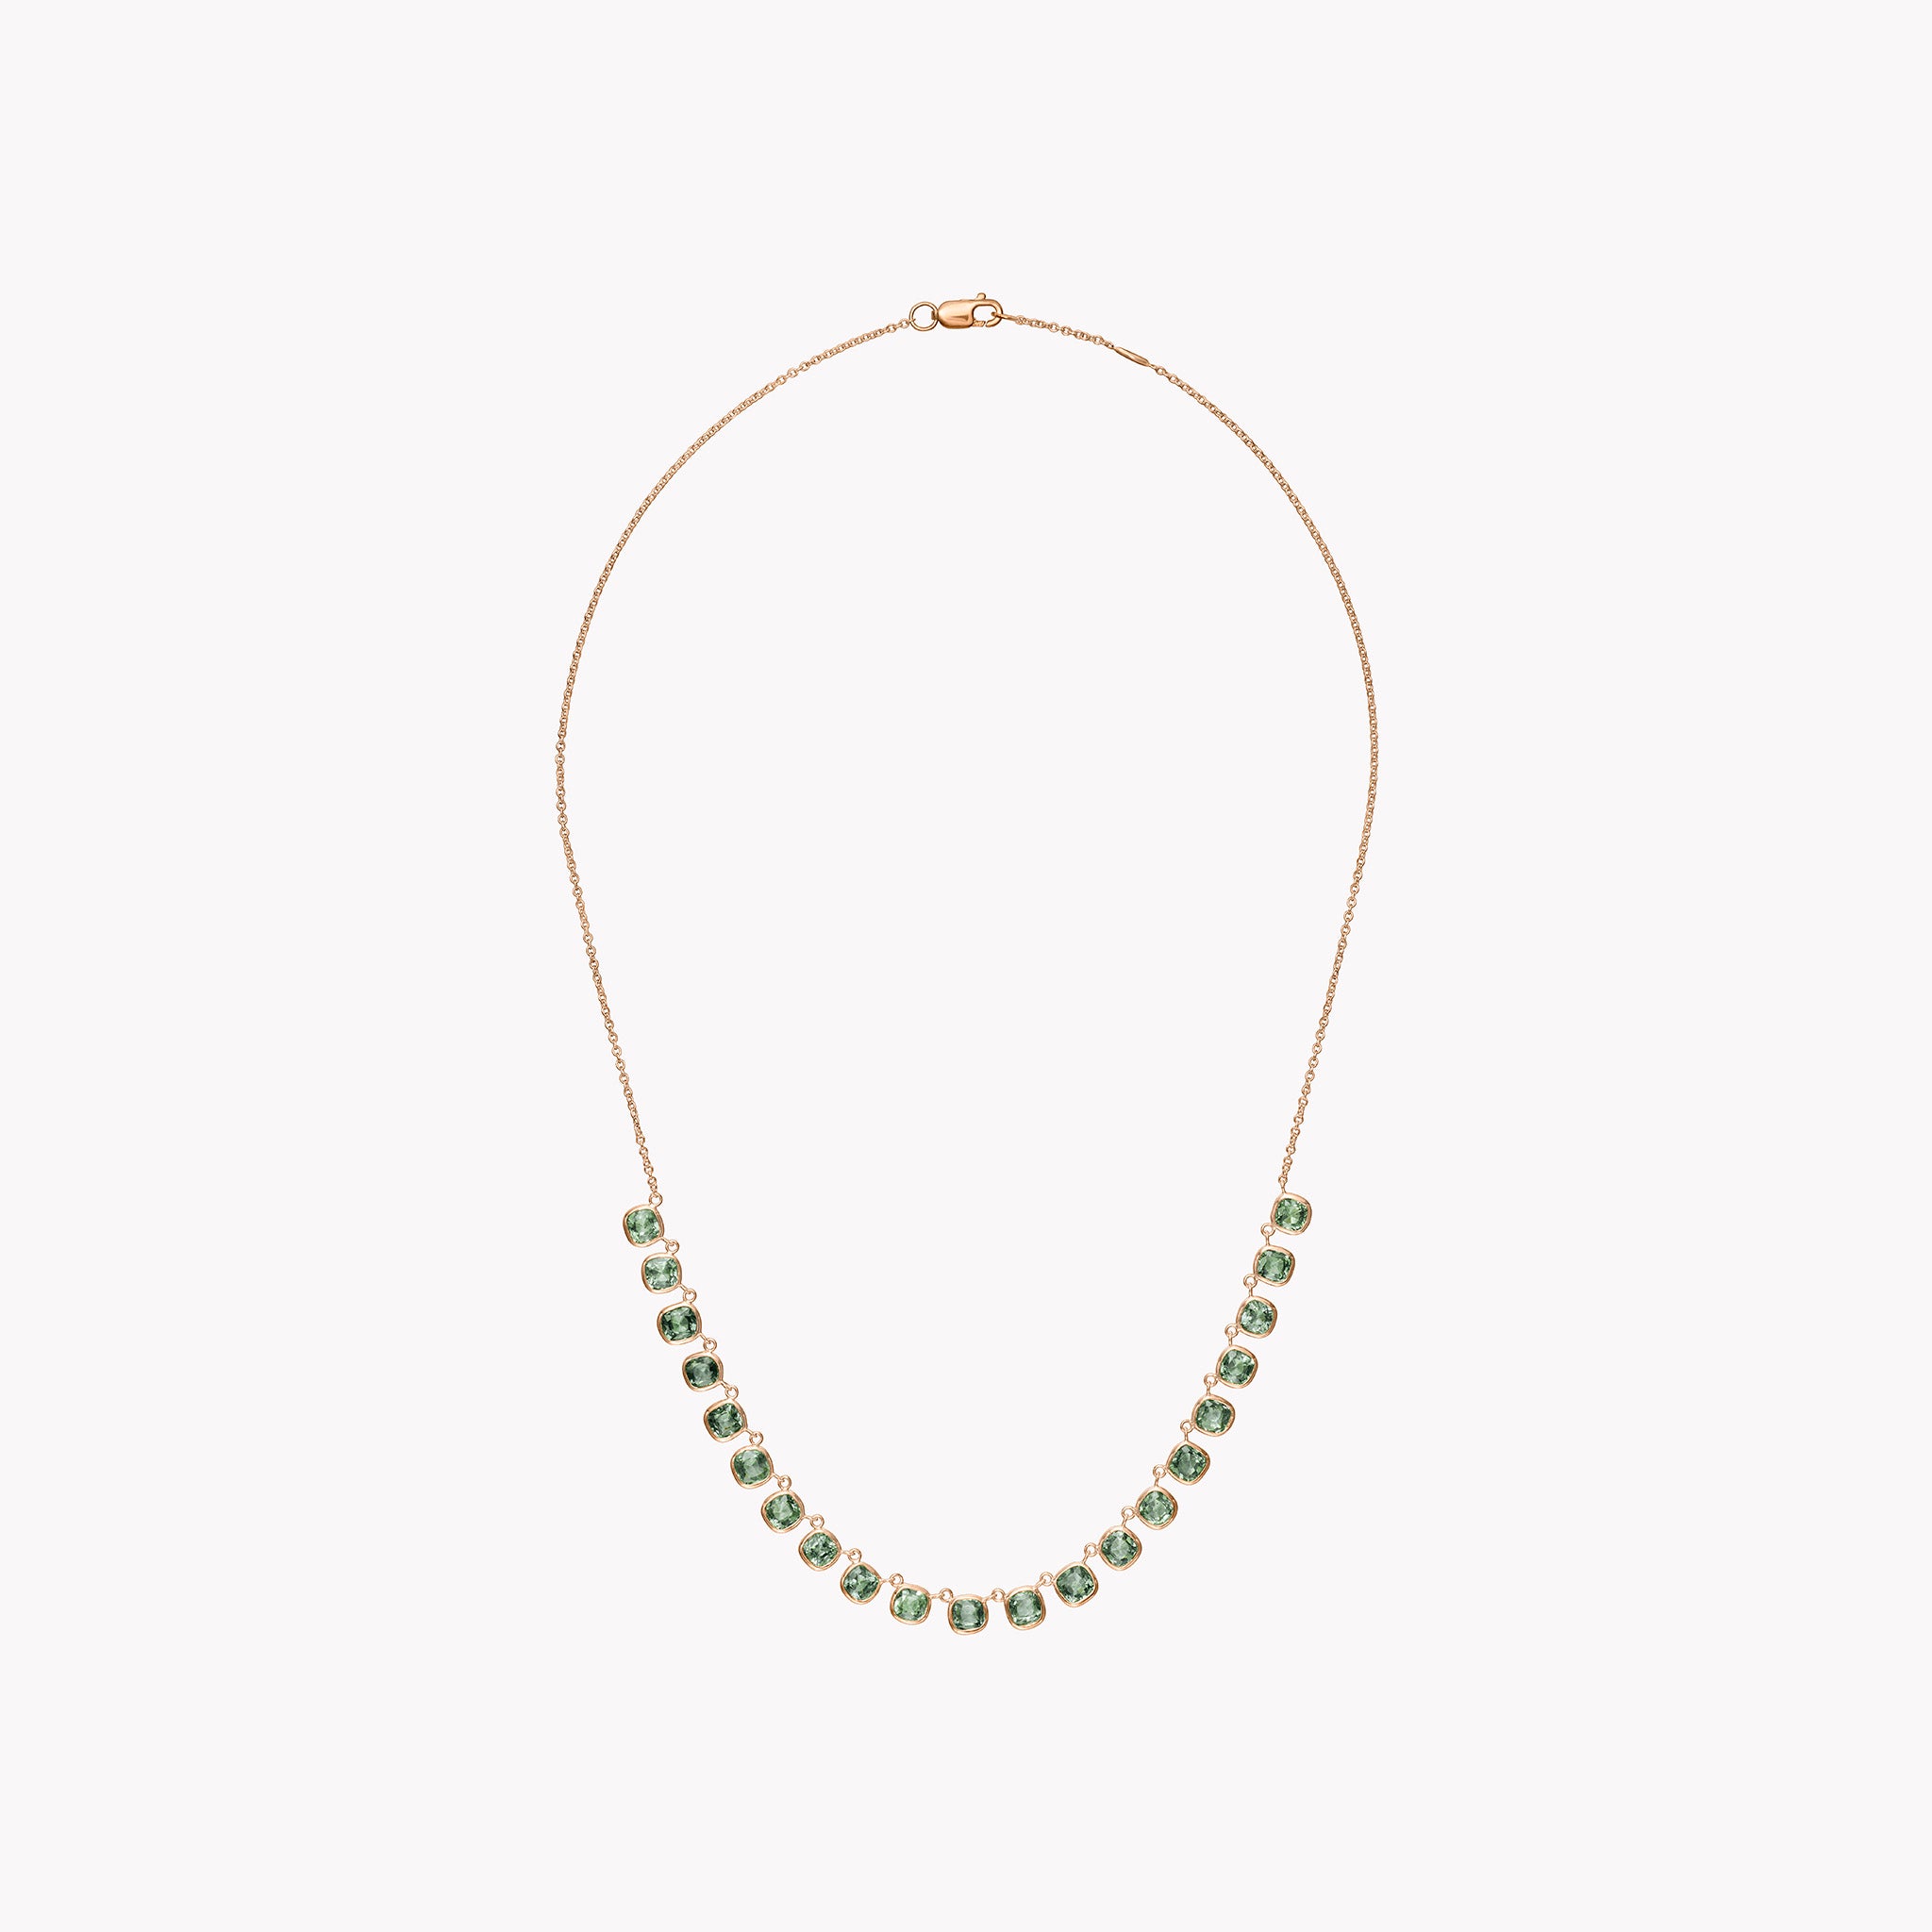 The Lena Green Sapphire Necklace